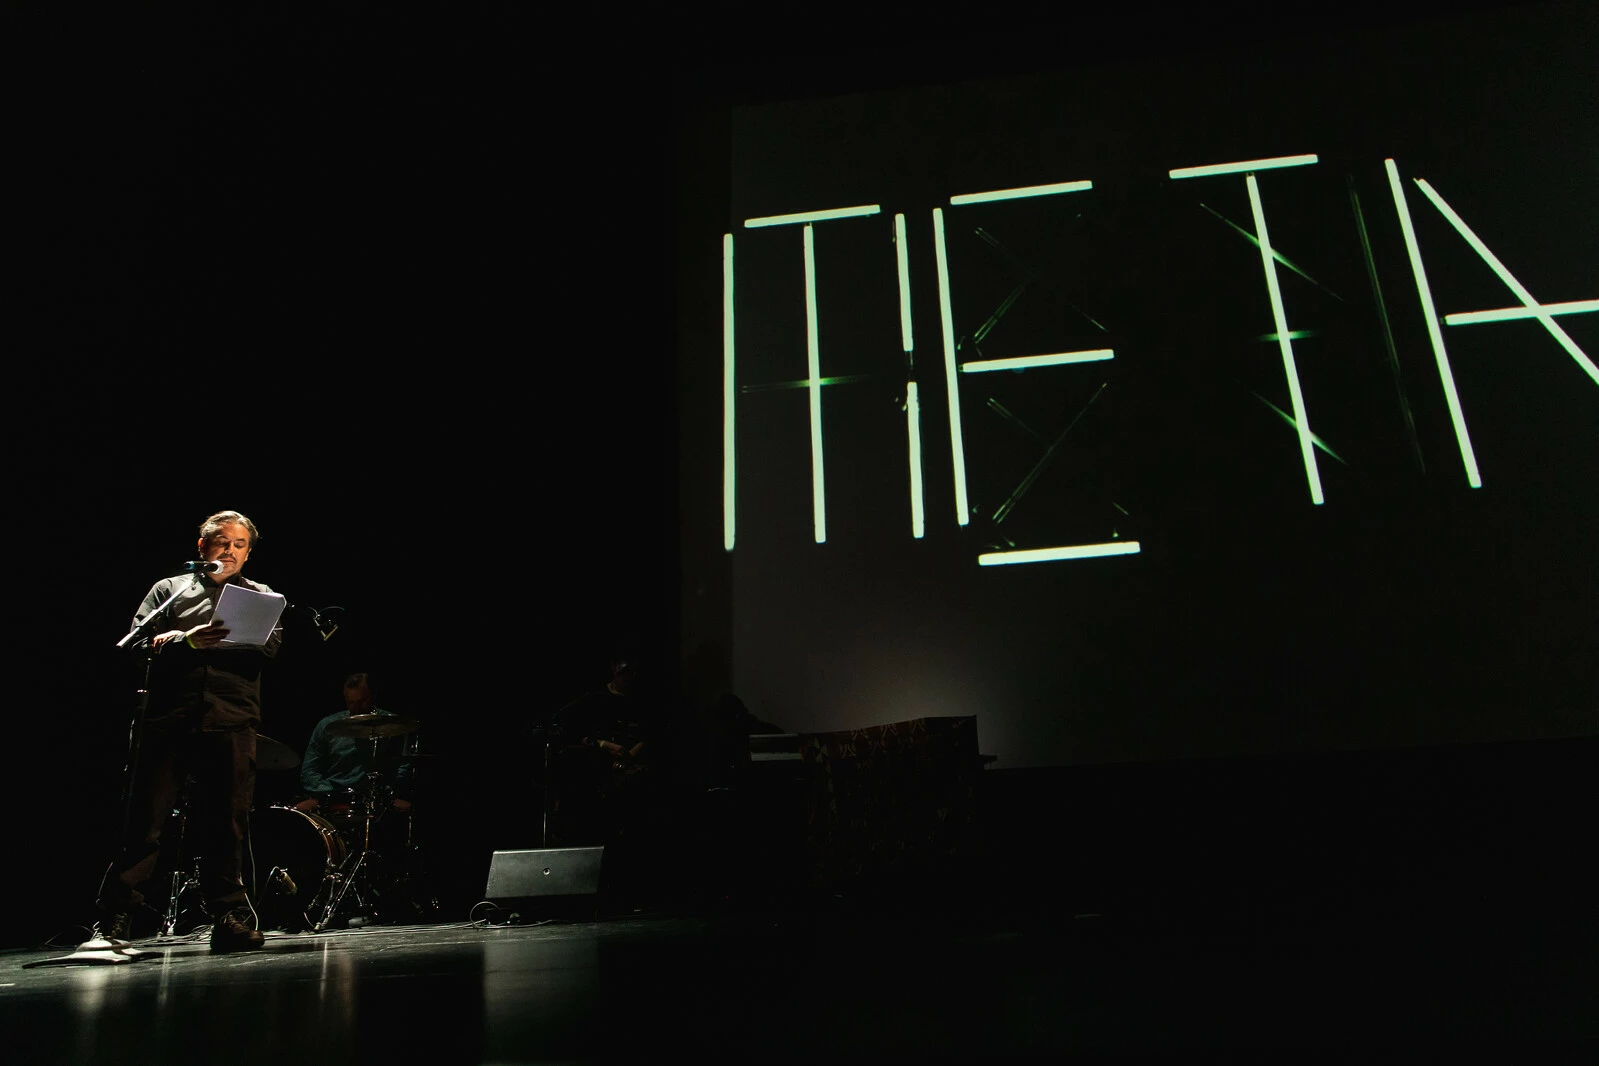 A person stands at a microphone with a band barely visible in the background. The word Meta is displayed on a large screen